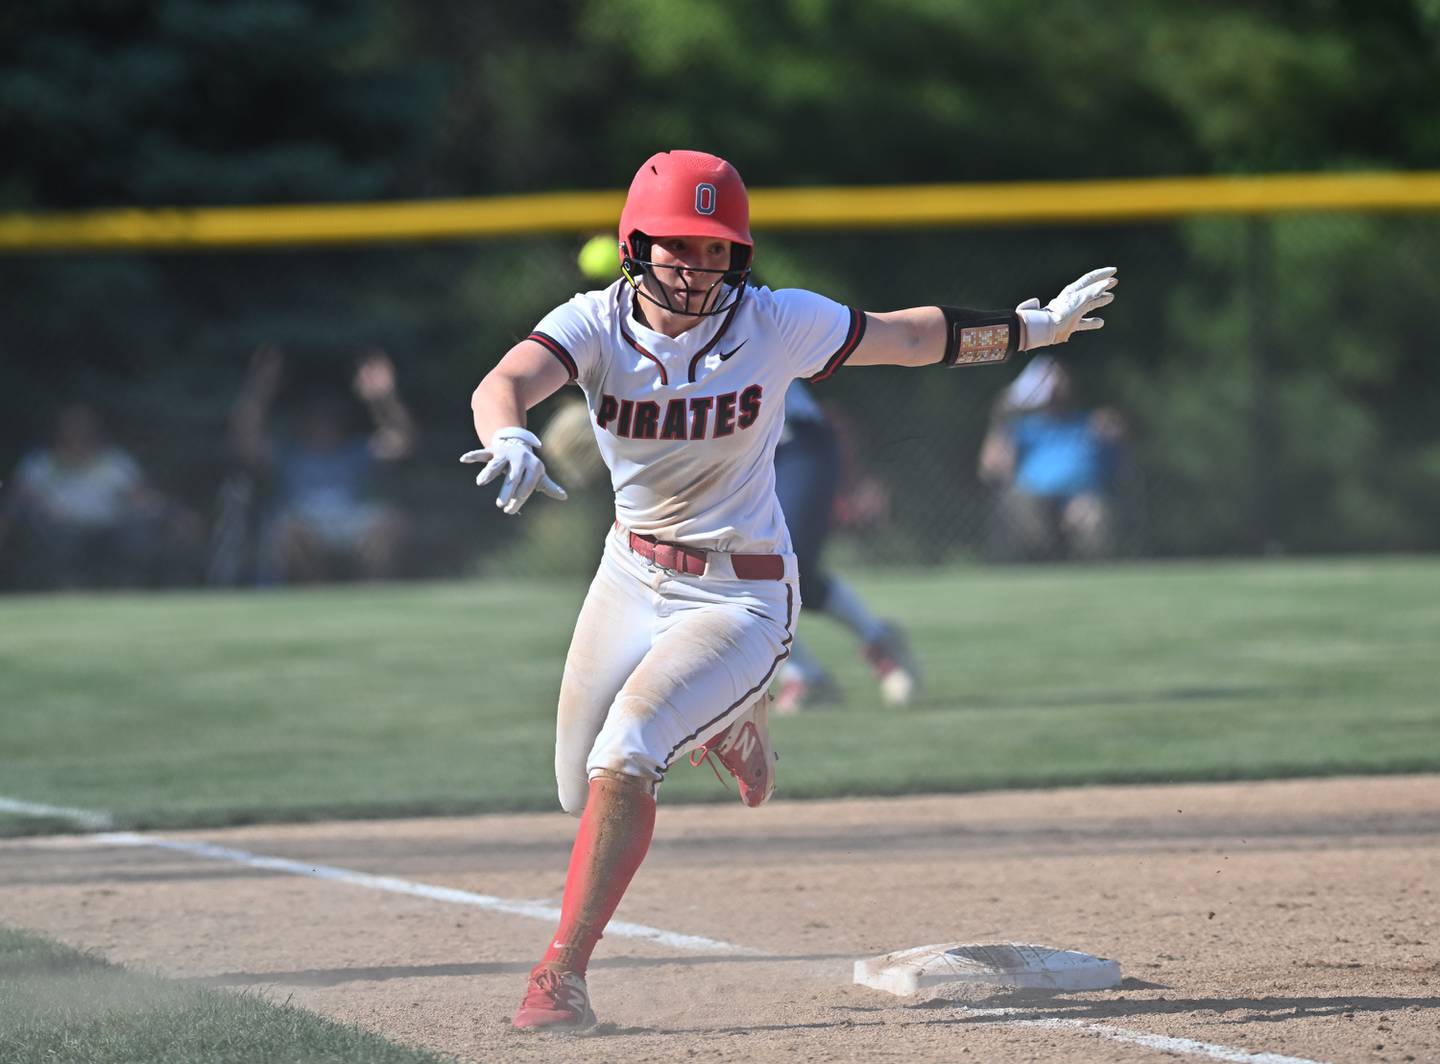 Ottawa's player rounding third base during the Lemont Class 3A Sectional Final game against Lemont on Friday, June. 02, 2023, at Lemont.